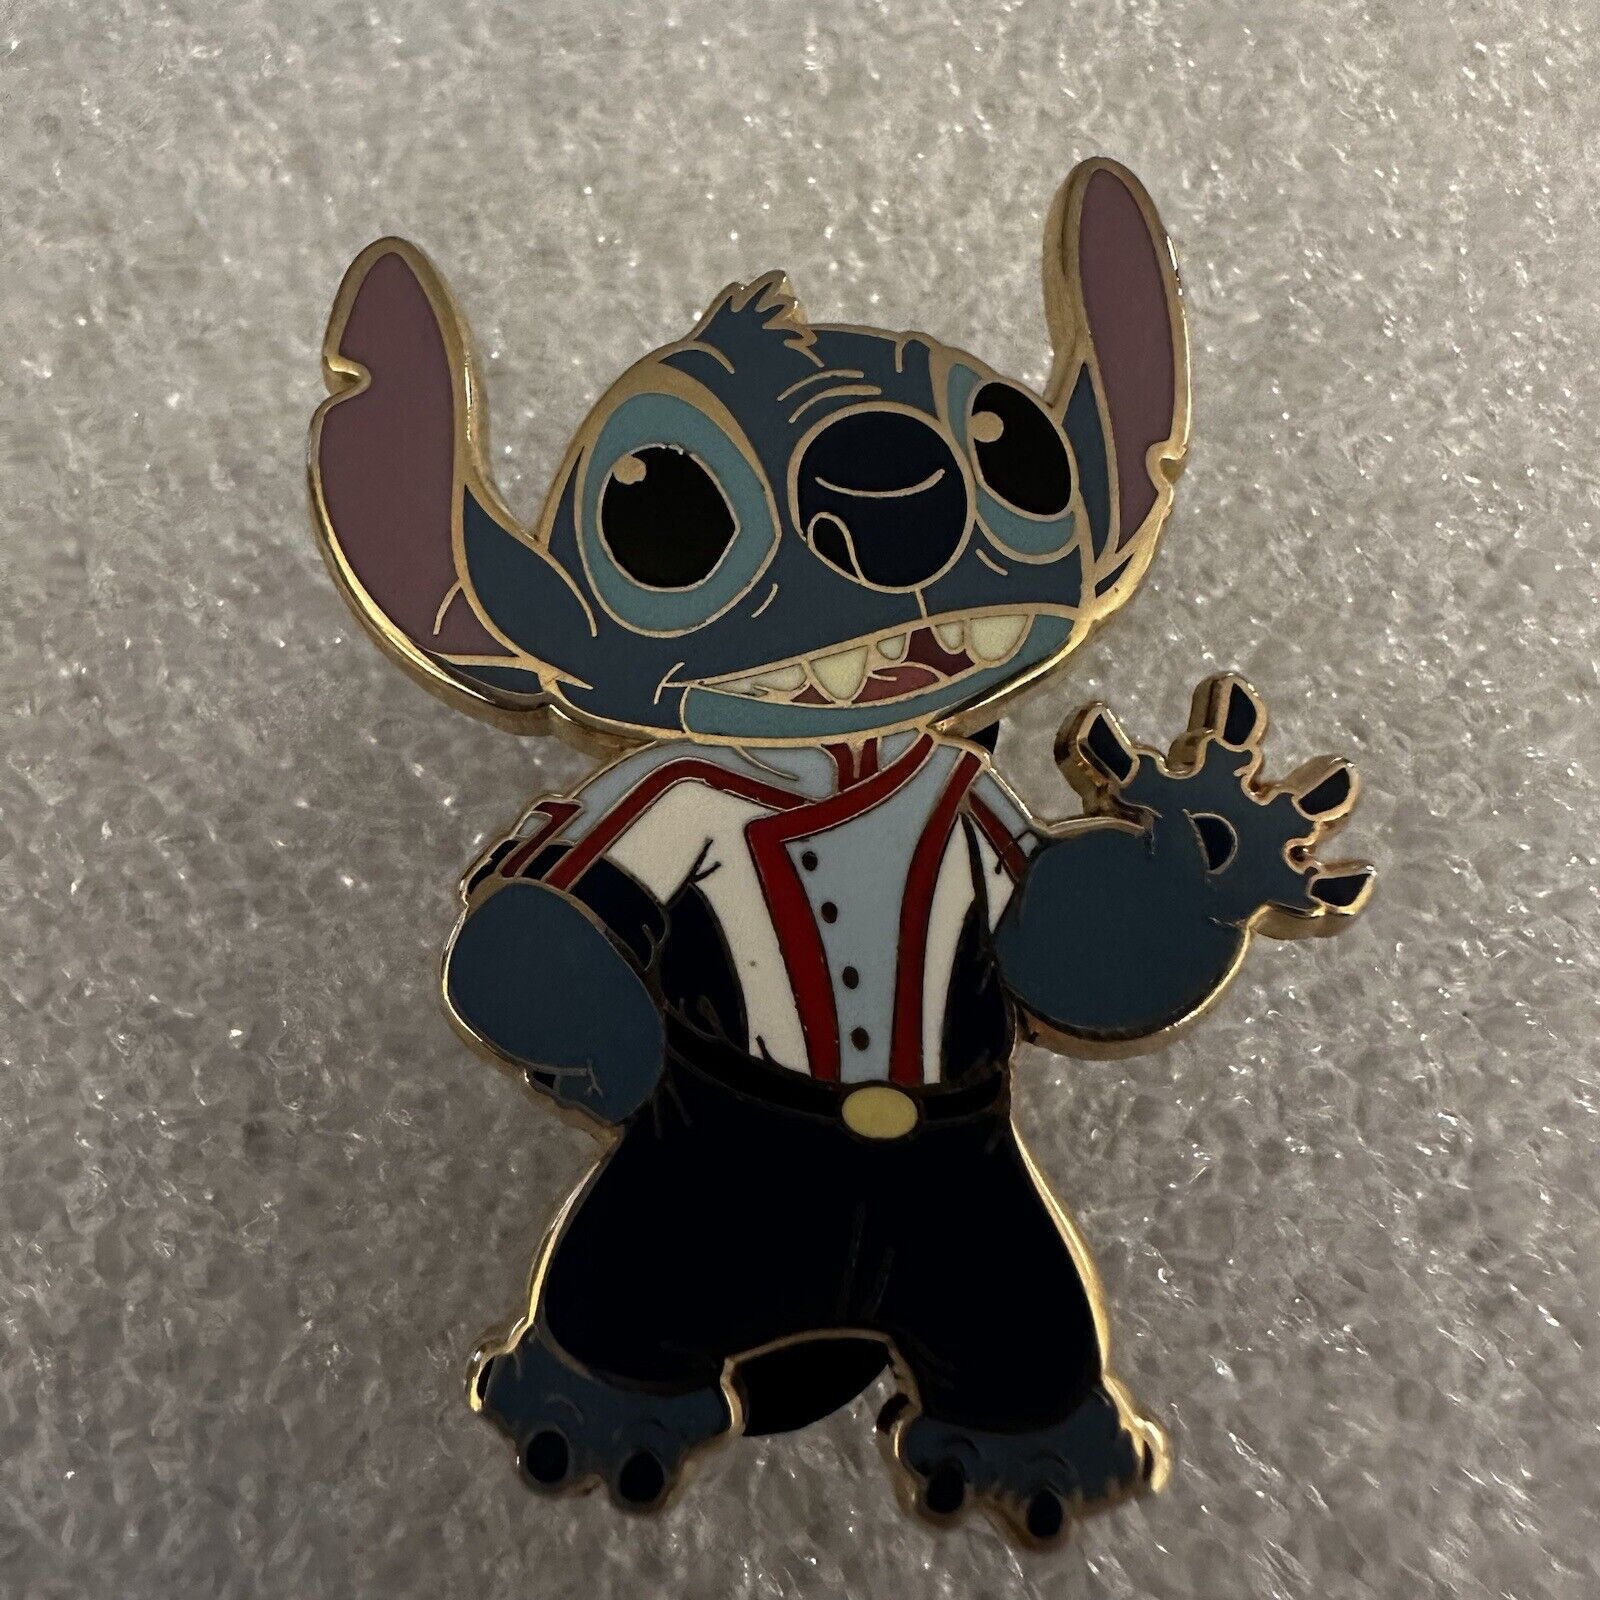 DISNEY WDI STITCH DRESSED IN CAST MEMBER COSTUMES MONORAIL PIN ON CARD LE 300